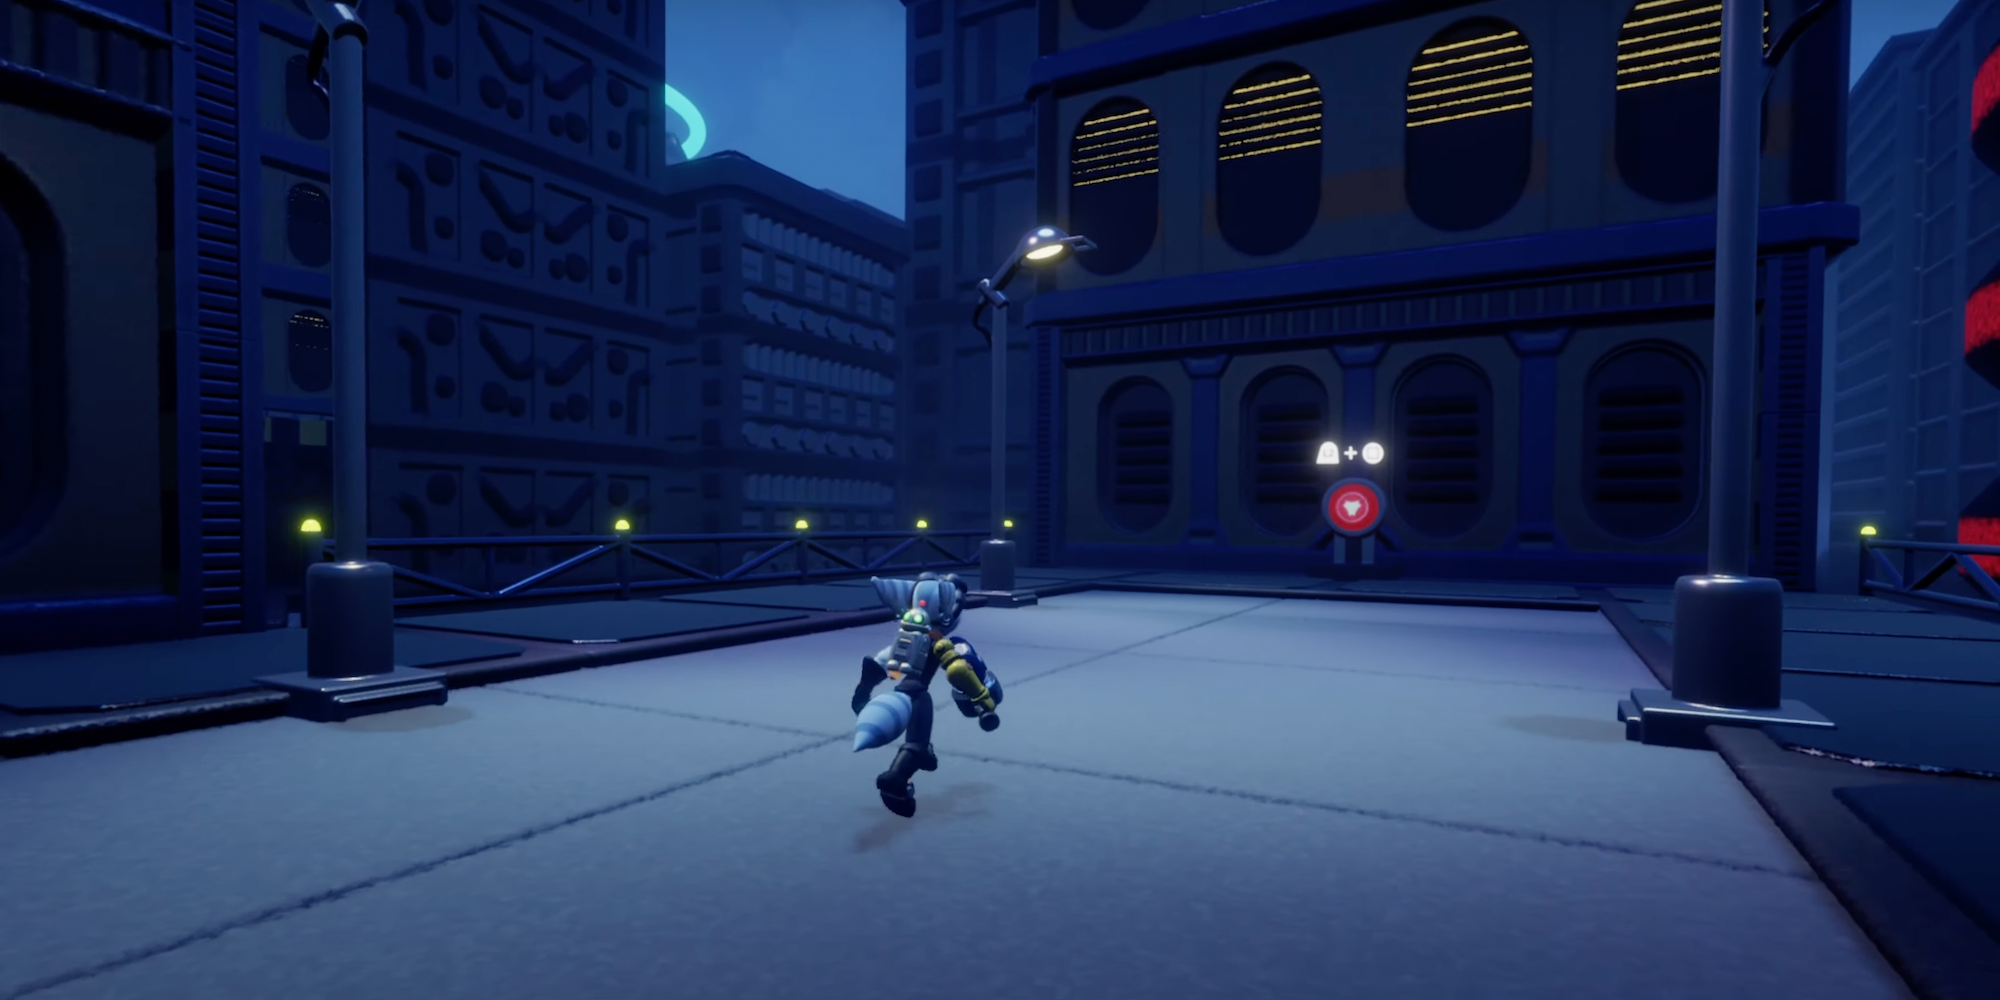 Ratchet & Clank fan game made in Dreams